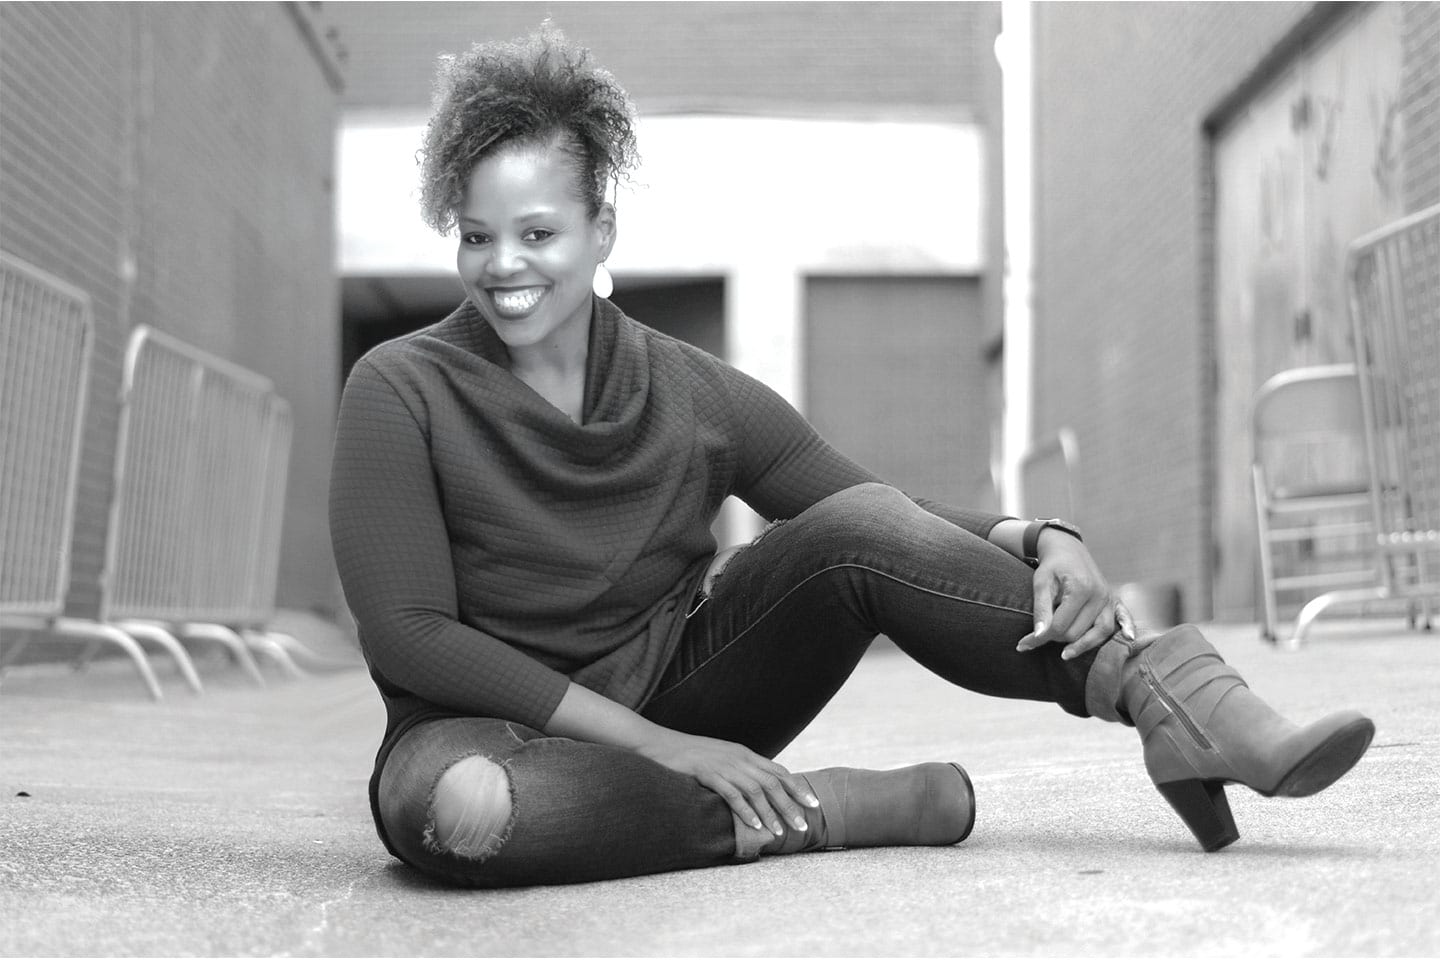 Woman sitting on concrete and smiling